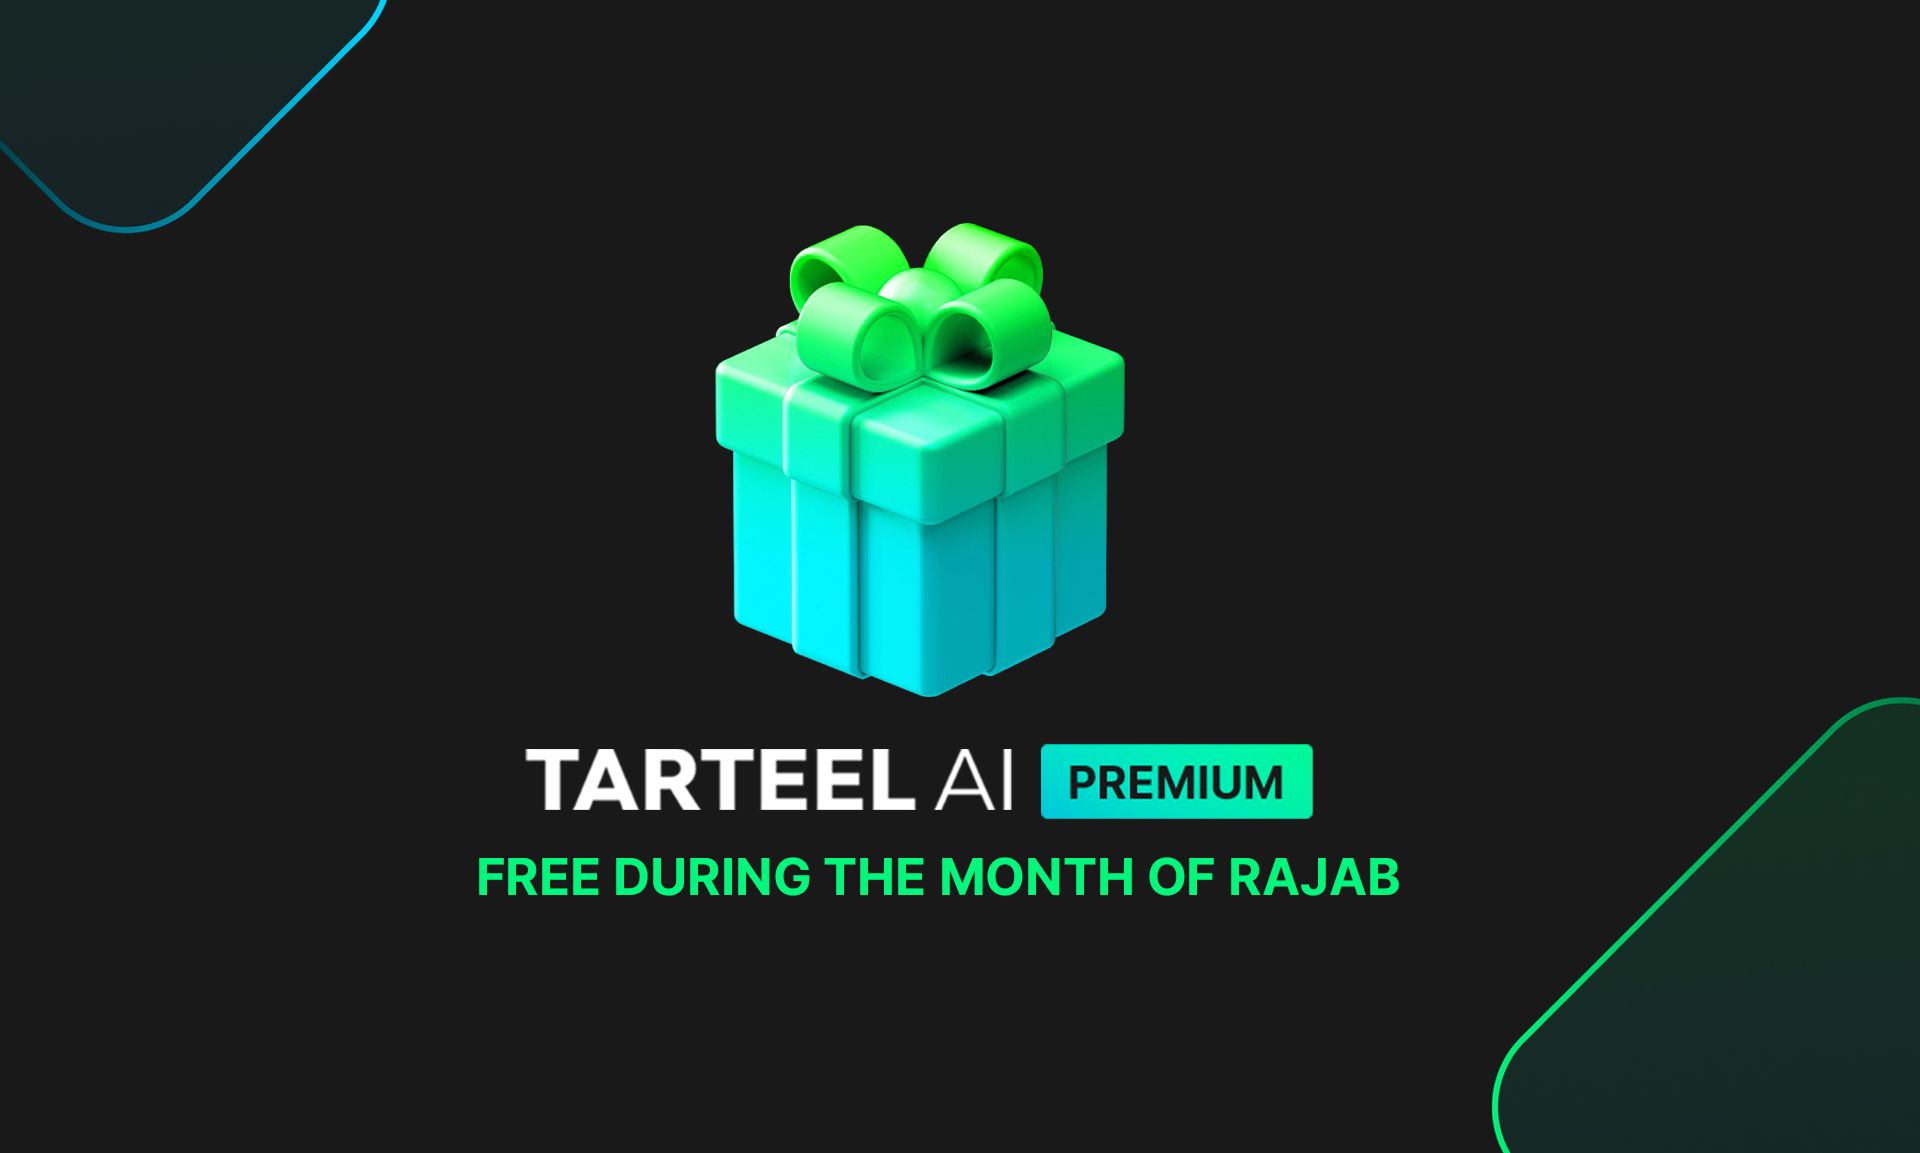 A graphic of a present with Tarteel AI Premium, available for FREE during the month of Rajab